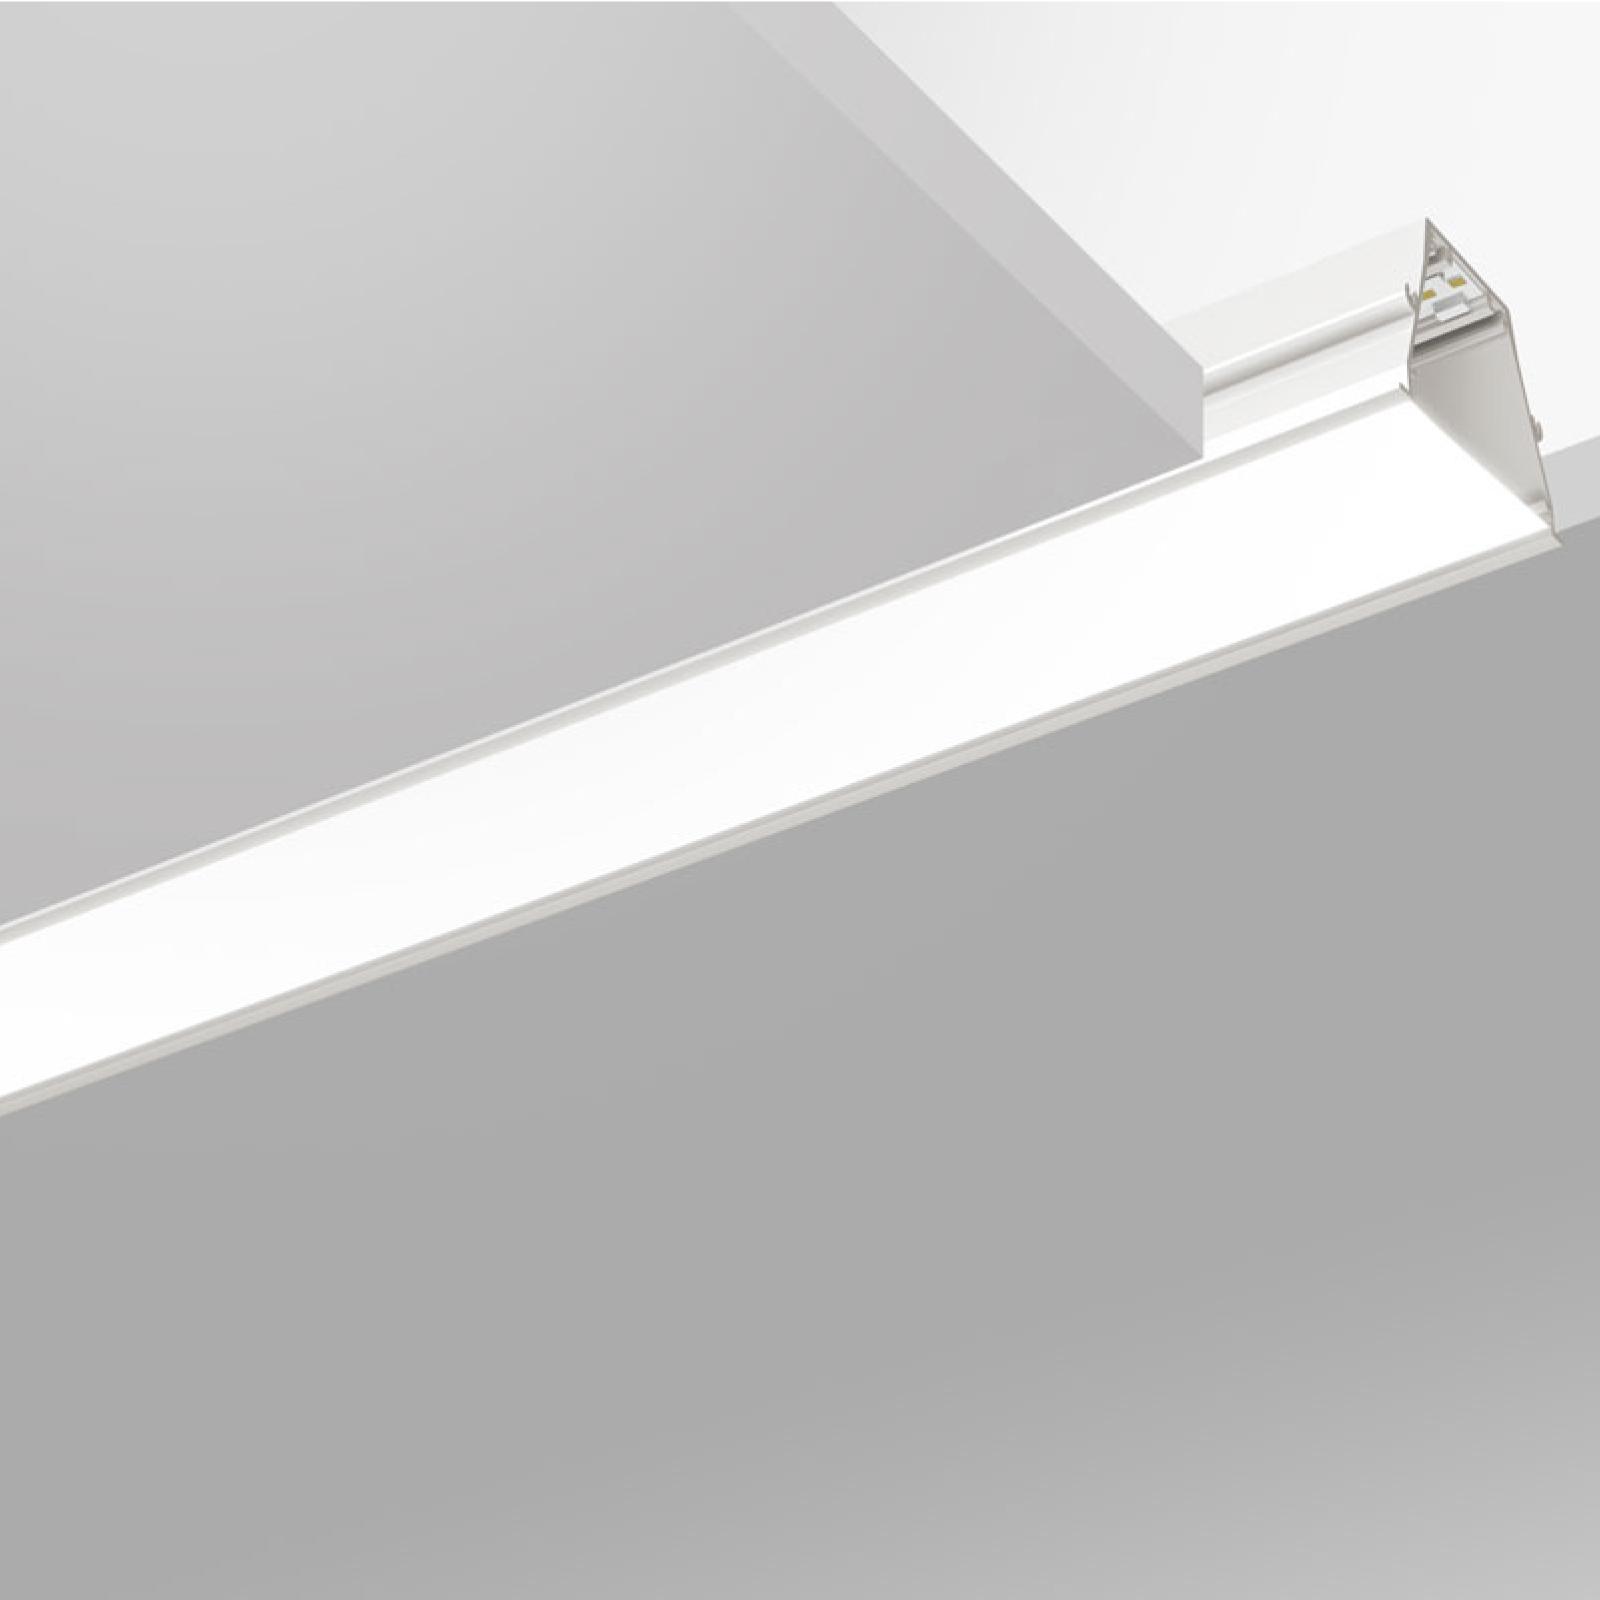 Gallery Rollip Linear Light System Linealightgroup 1200X1200 6